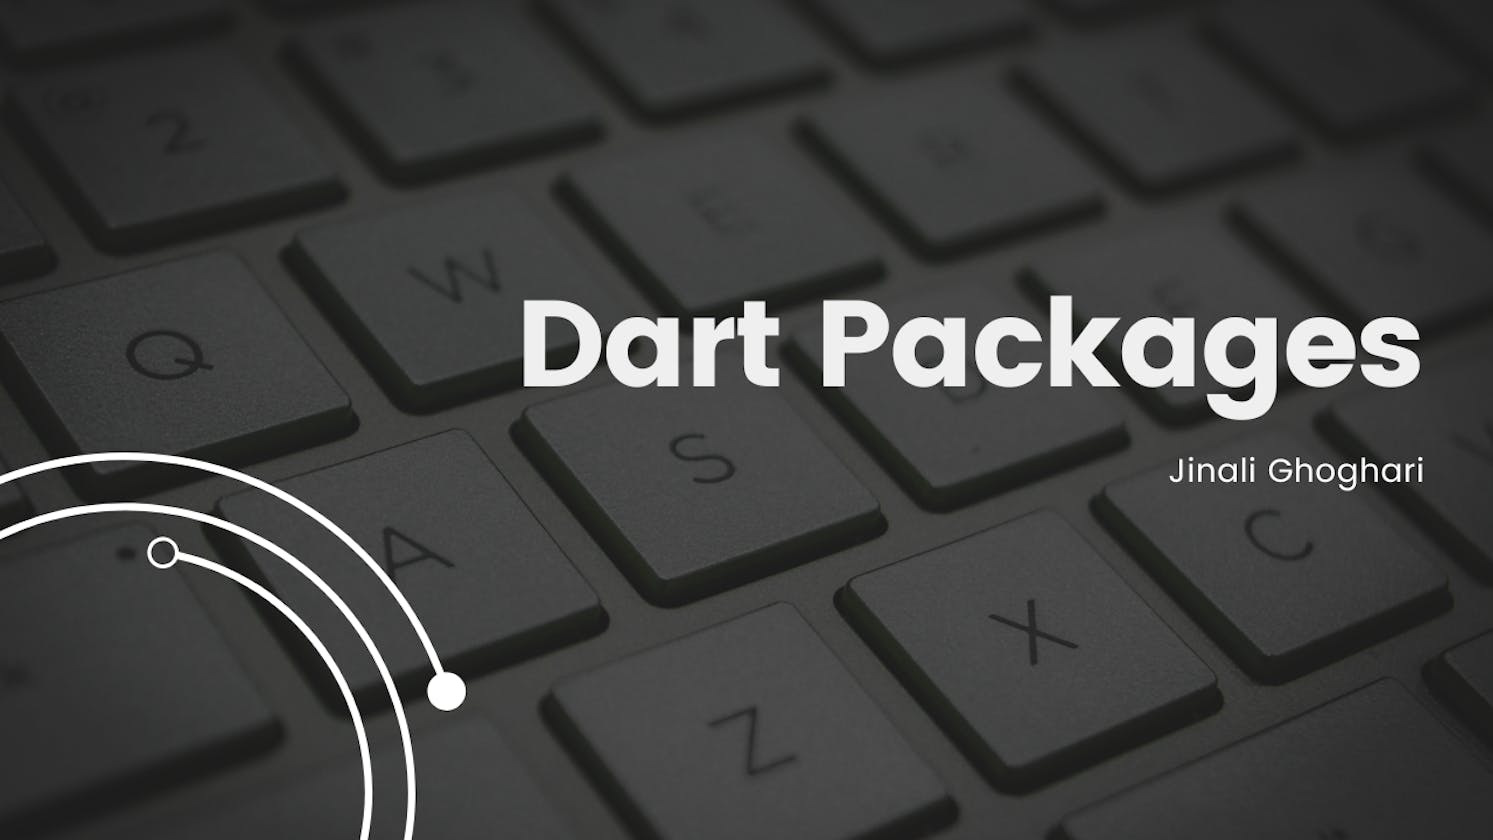 Dart Packages